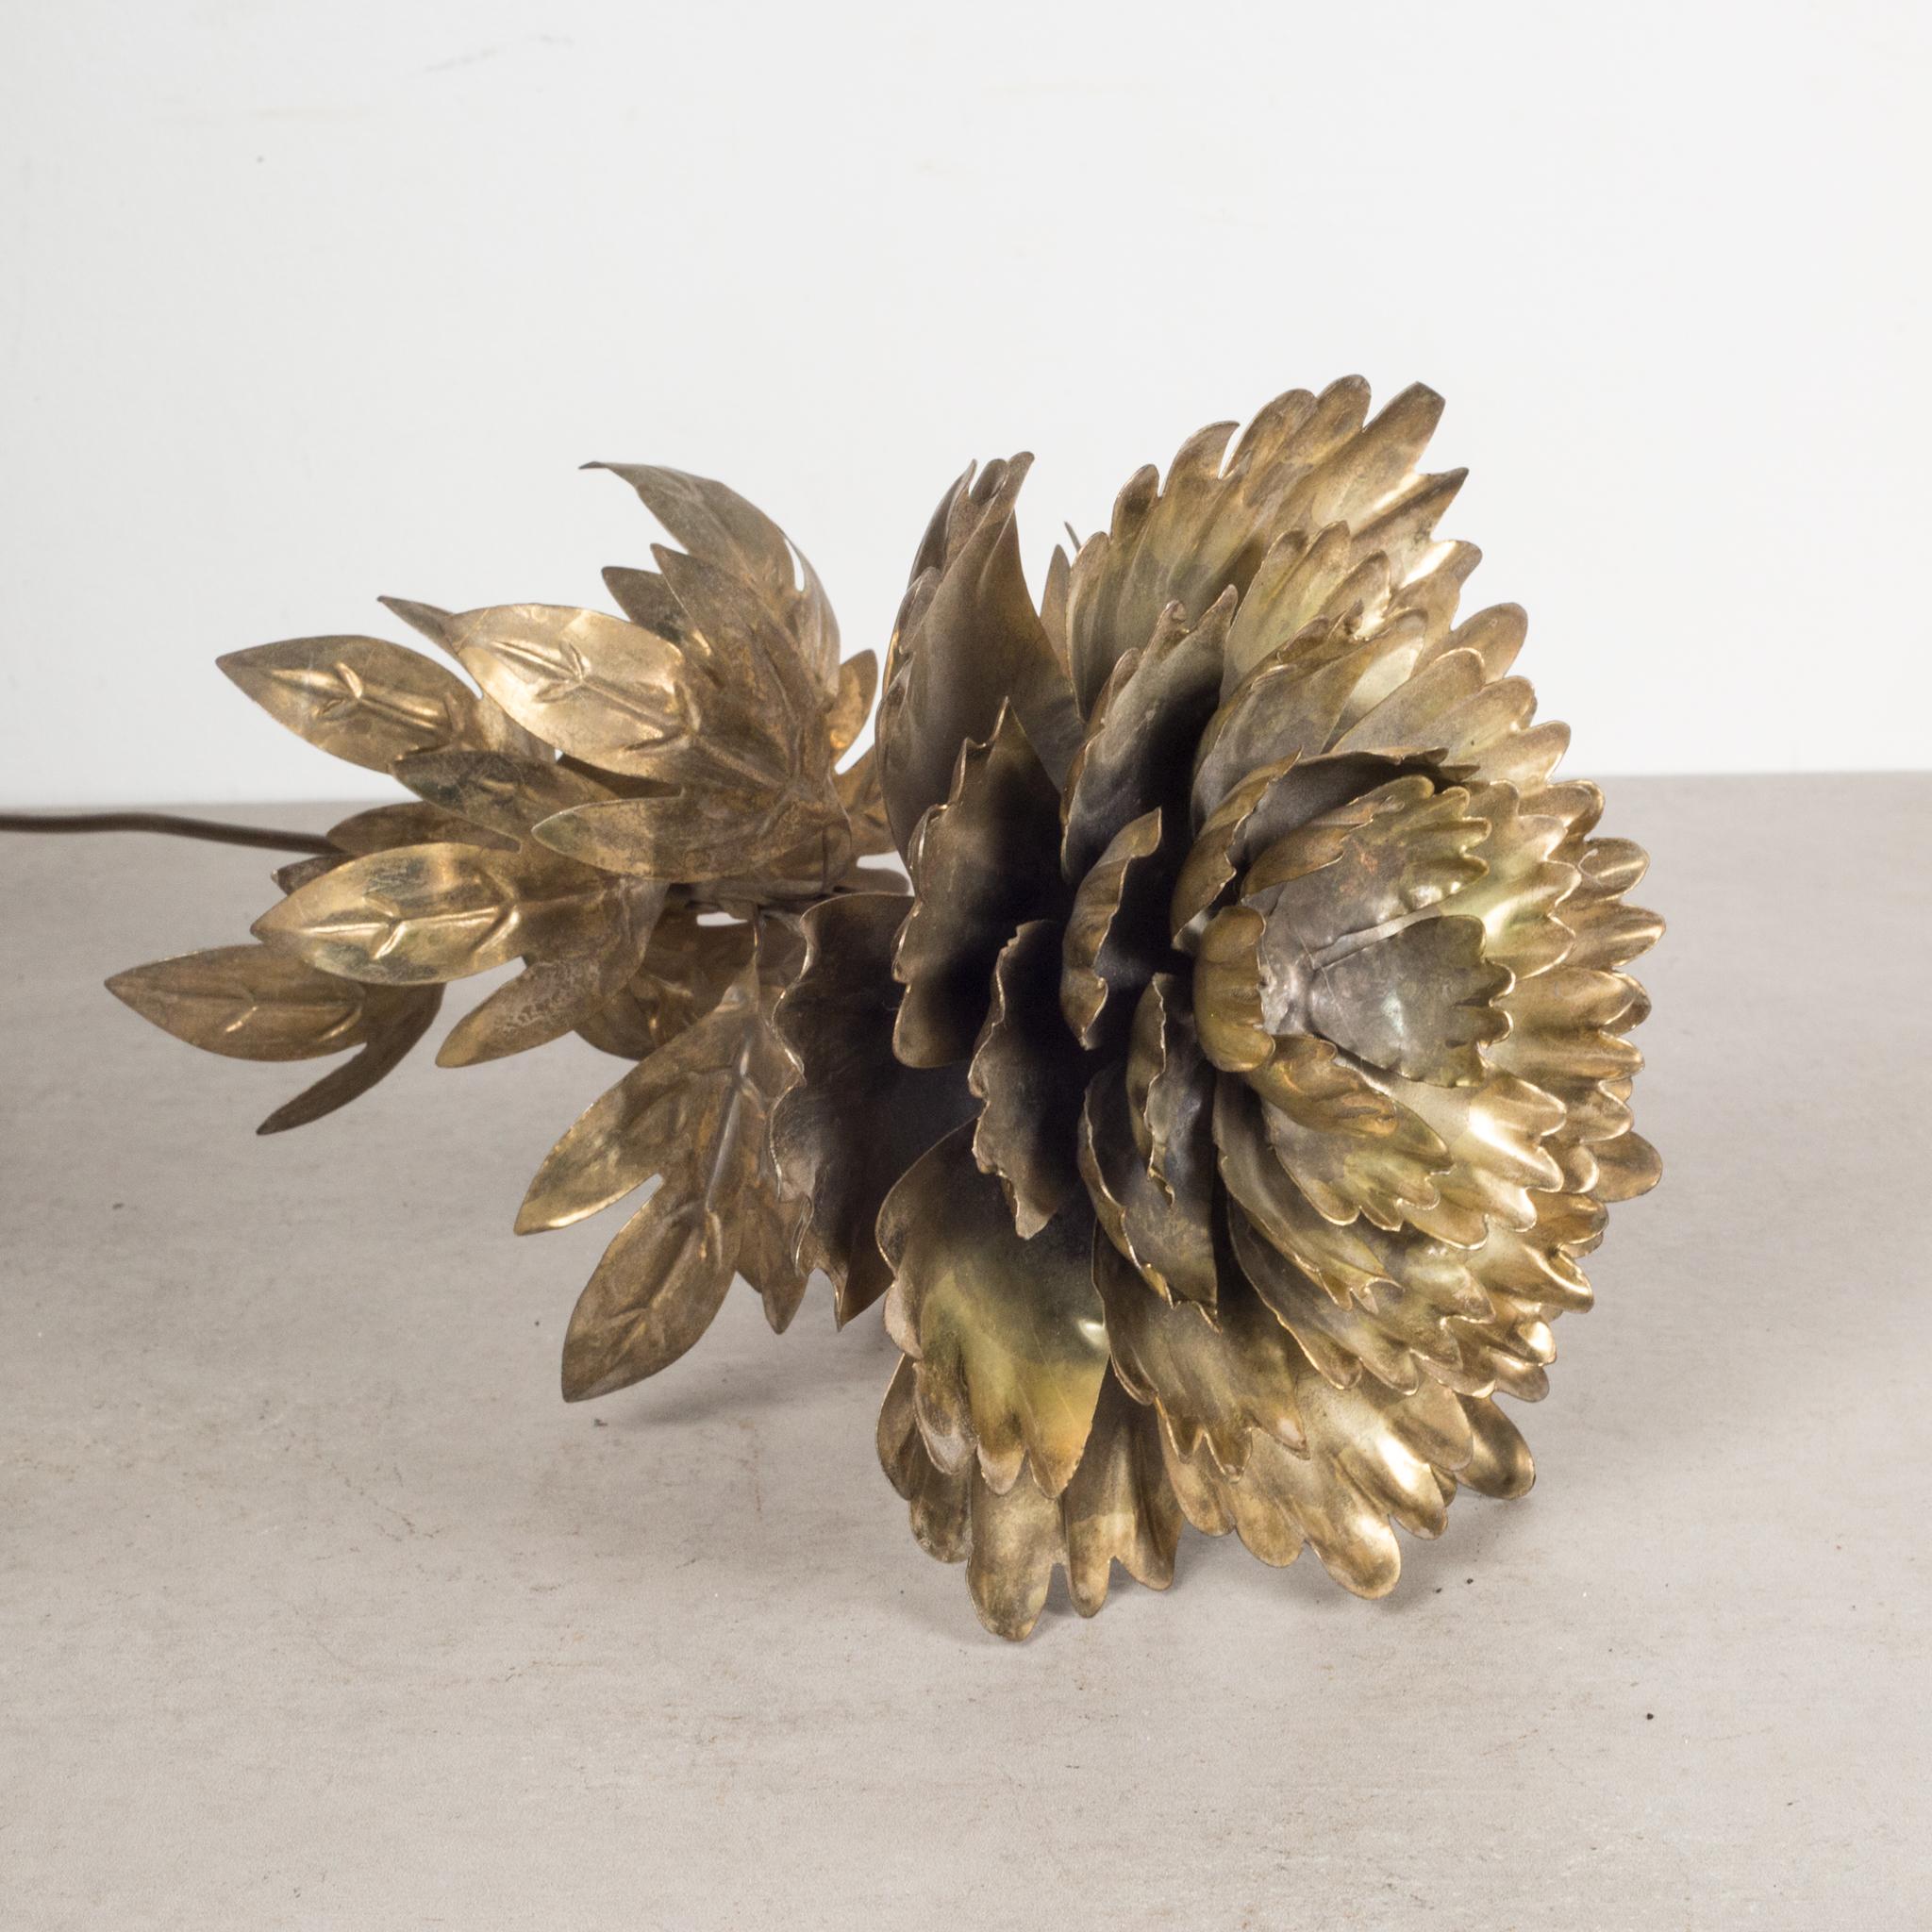 Hand-Crafted Collection of Hand Cut Metal Flower Sculpture